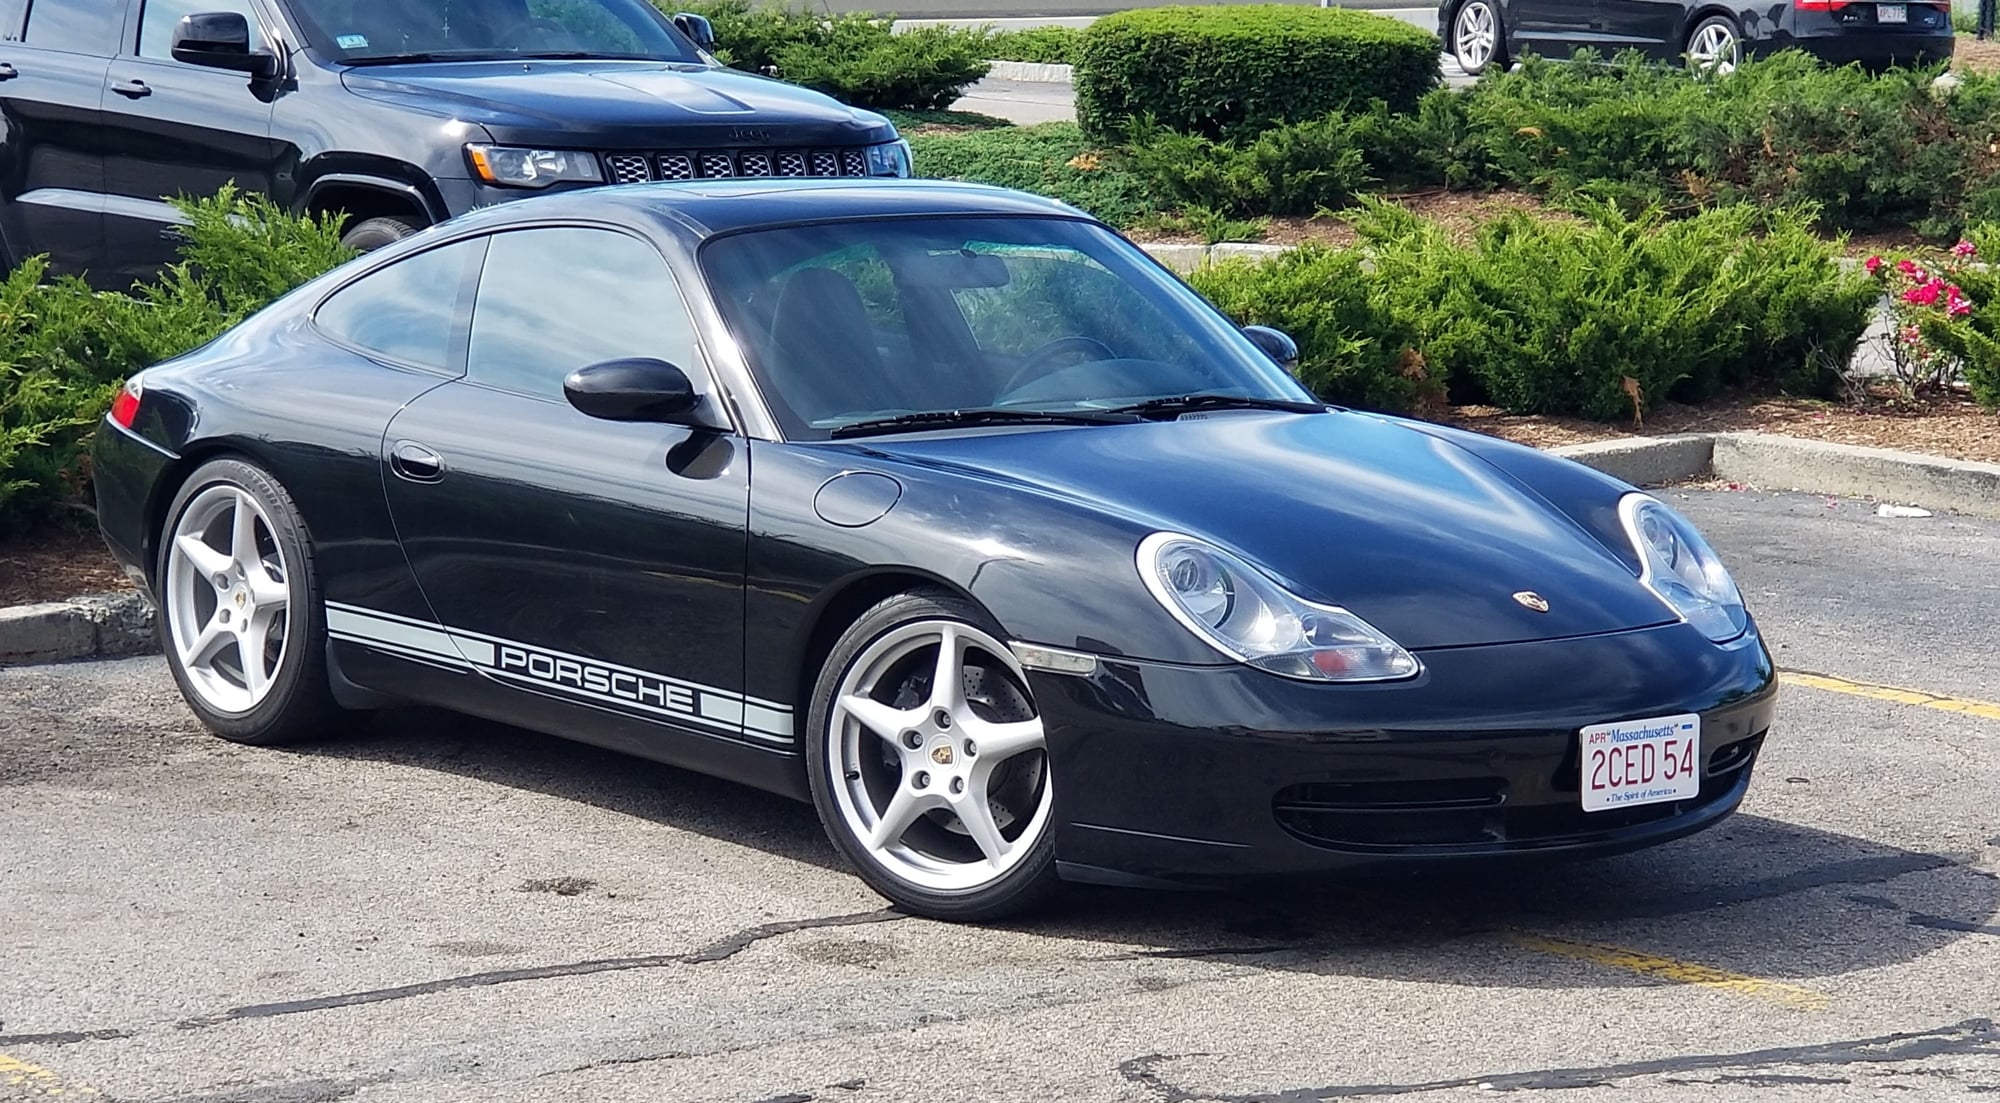 1999 Porsche 911 - Well sorted 1999 C2 - Used - VIN WPOAA2993XS620838 - 105,000 Miles - 6 cyl - 2WD - Manual - Coupe - Black - Boston, MA 02186, United States